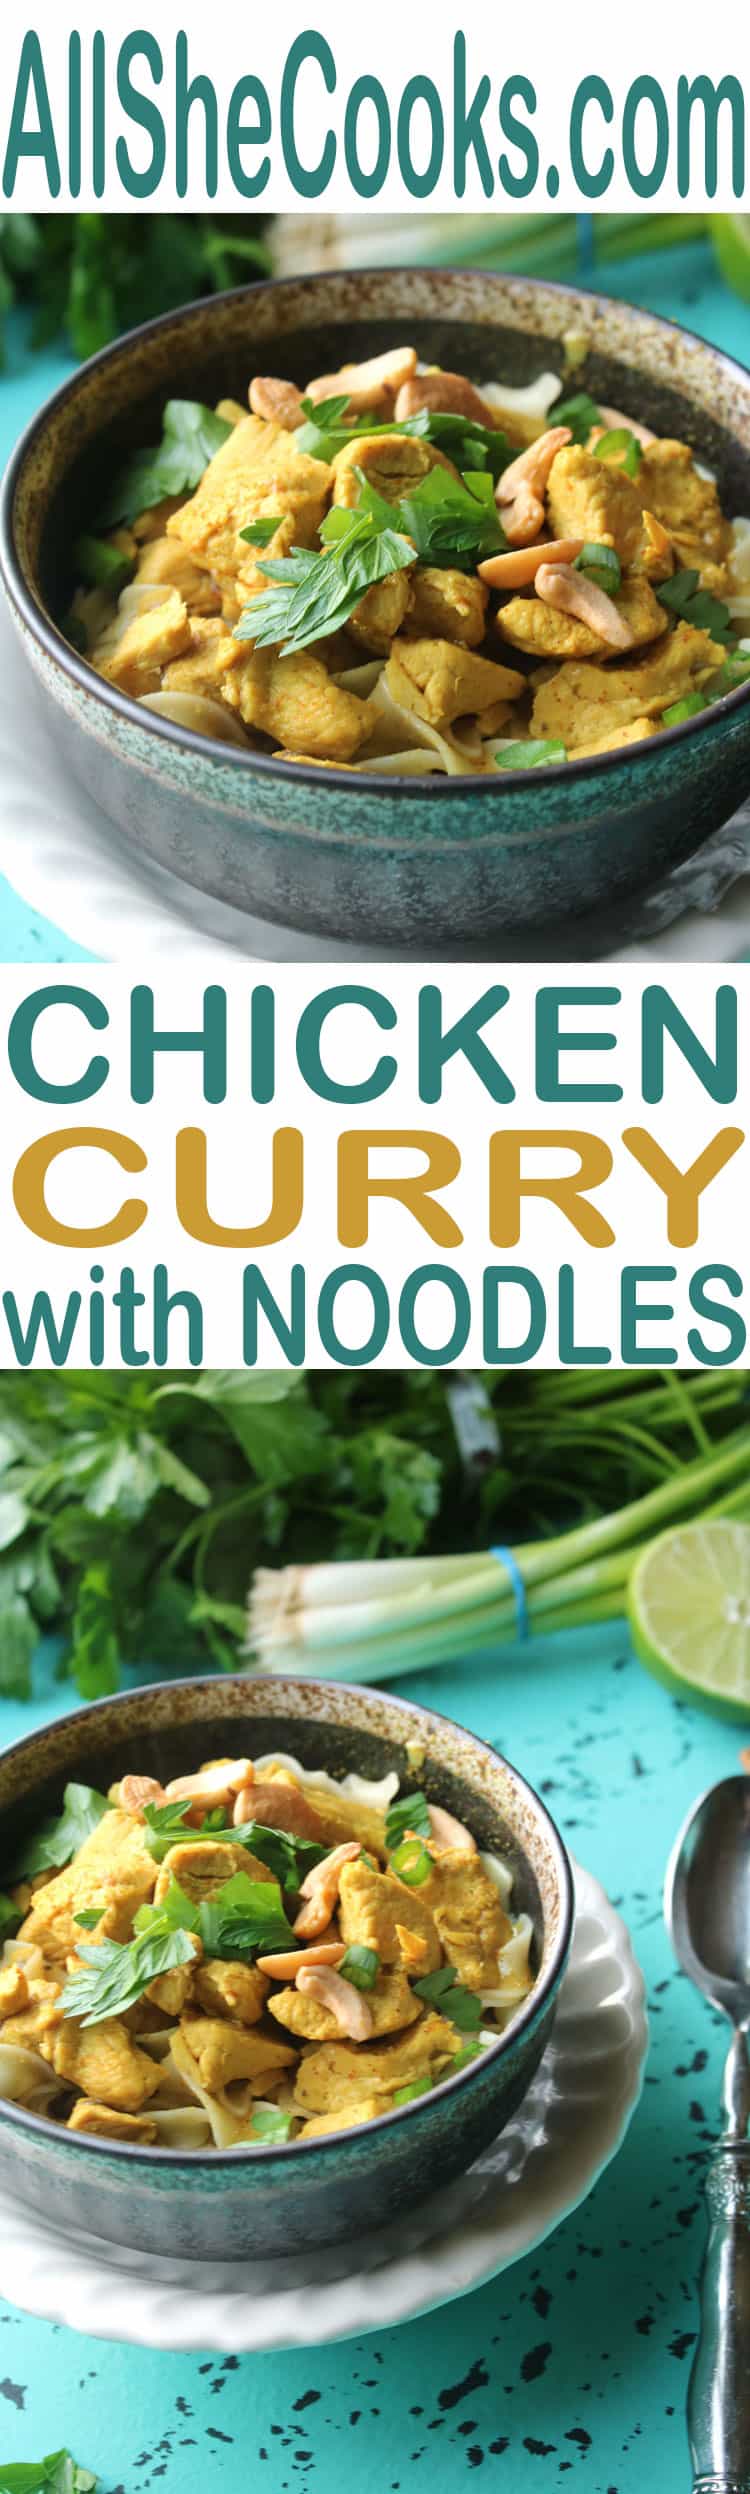 Enjoy this tasty Chicken Curry with Noodles recipe. It's an easy recipe that can be made with ingredients you have on hand as well as a few ingredients from the store. We love this delicious and simple weeknight dinner recipe. #curryrecipes